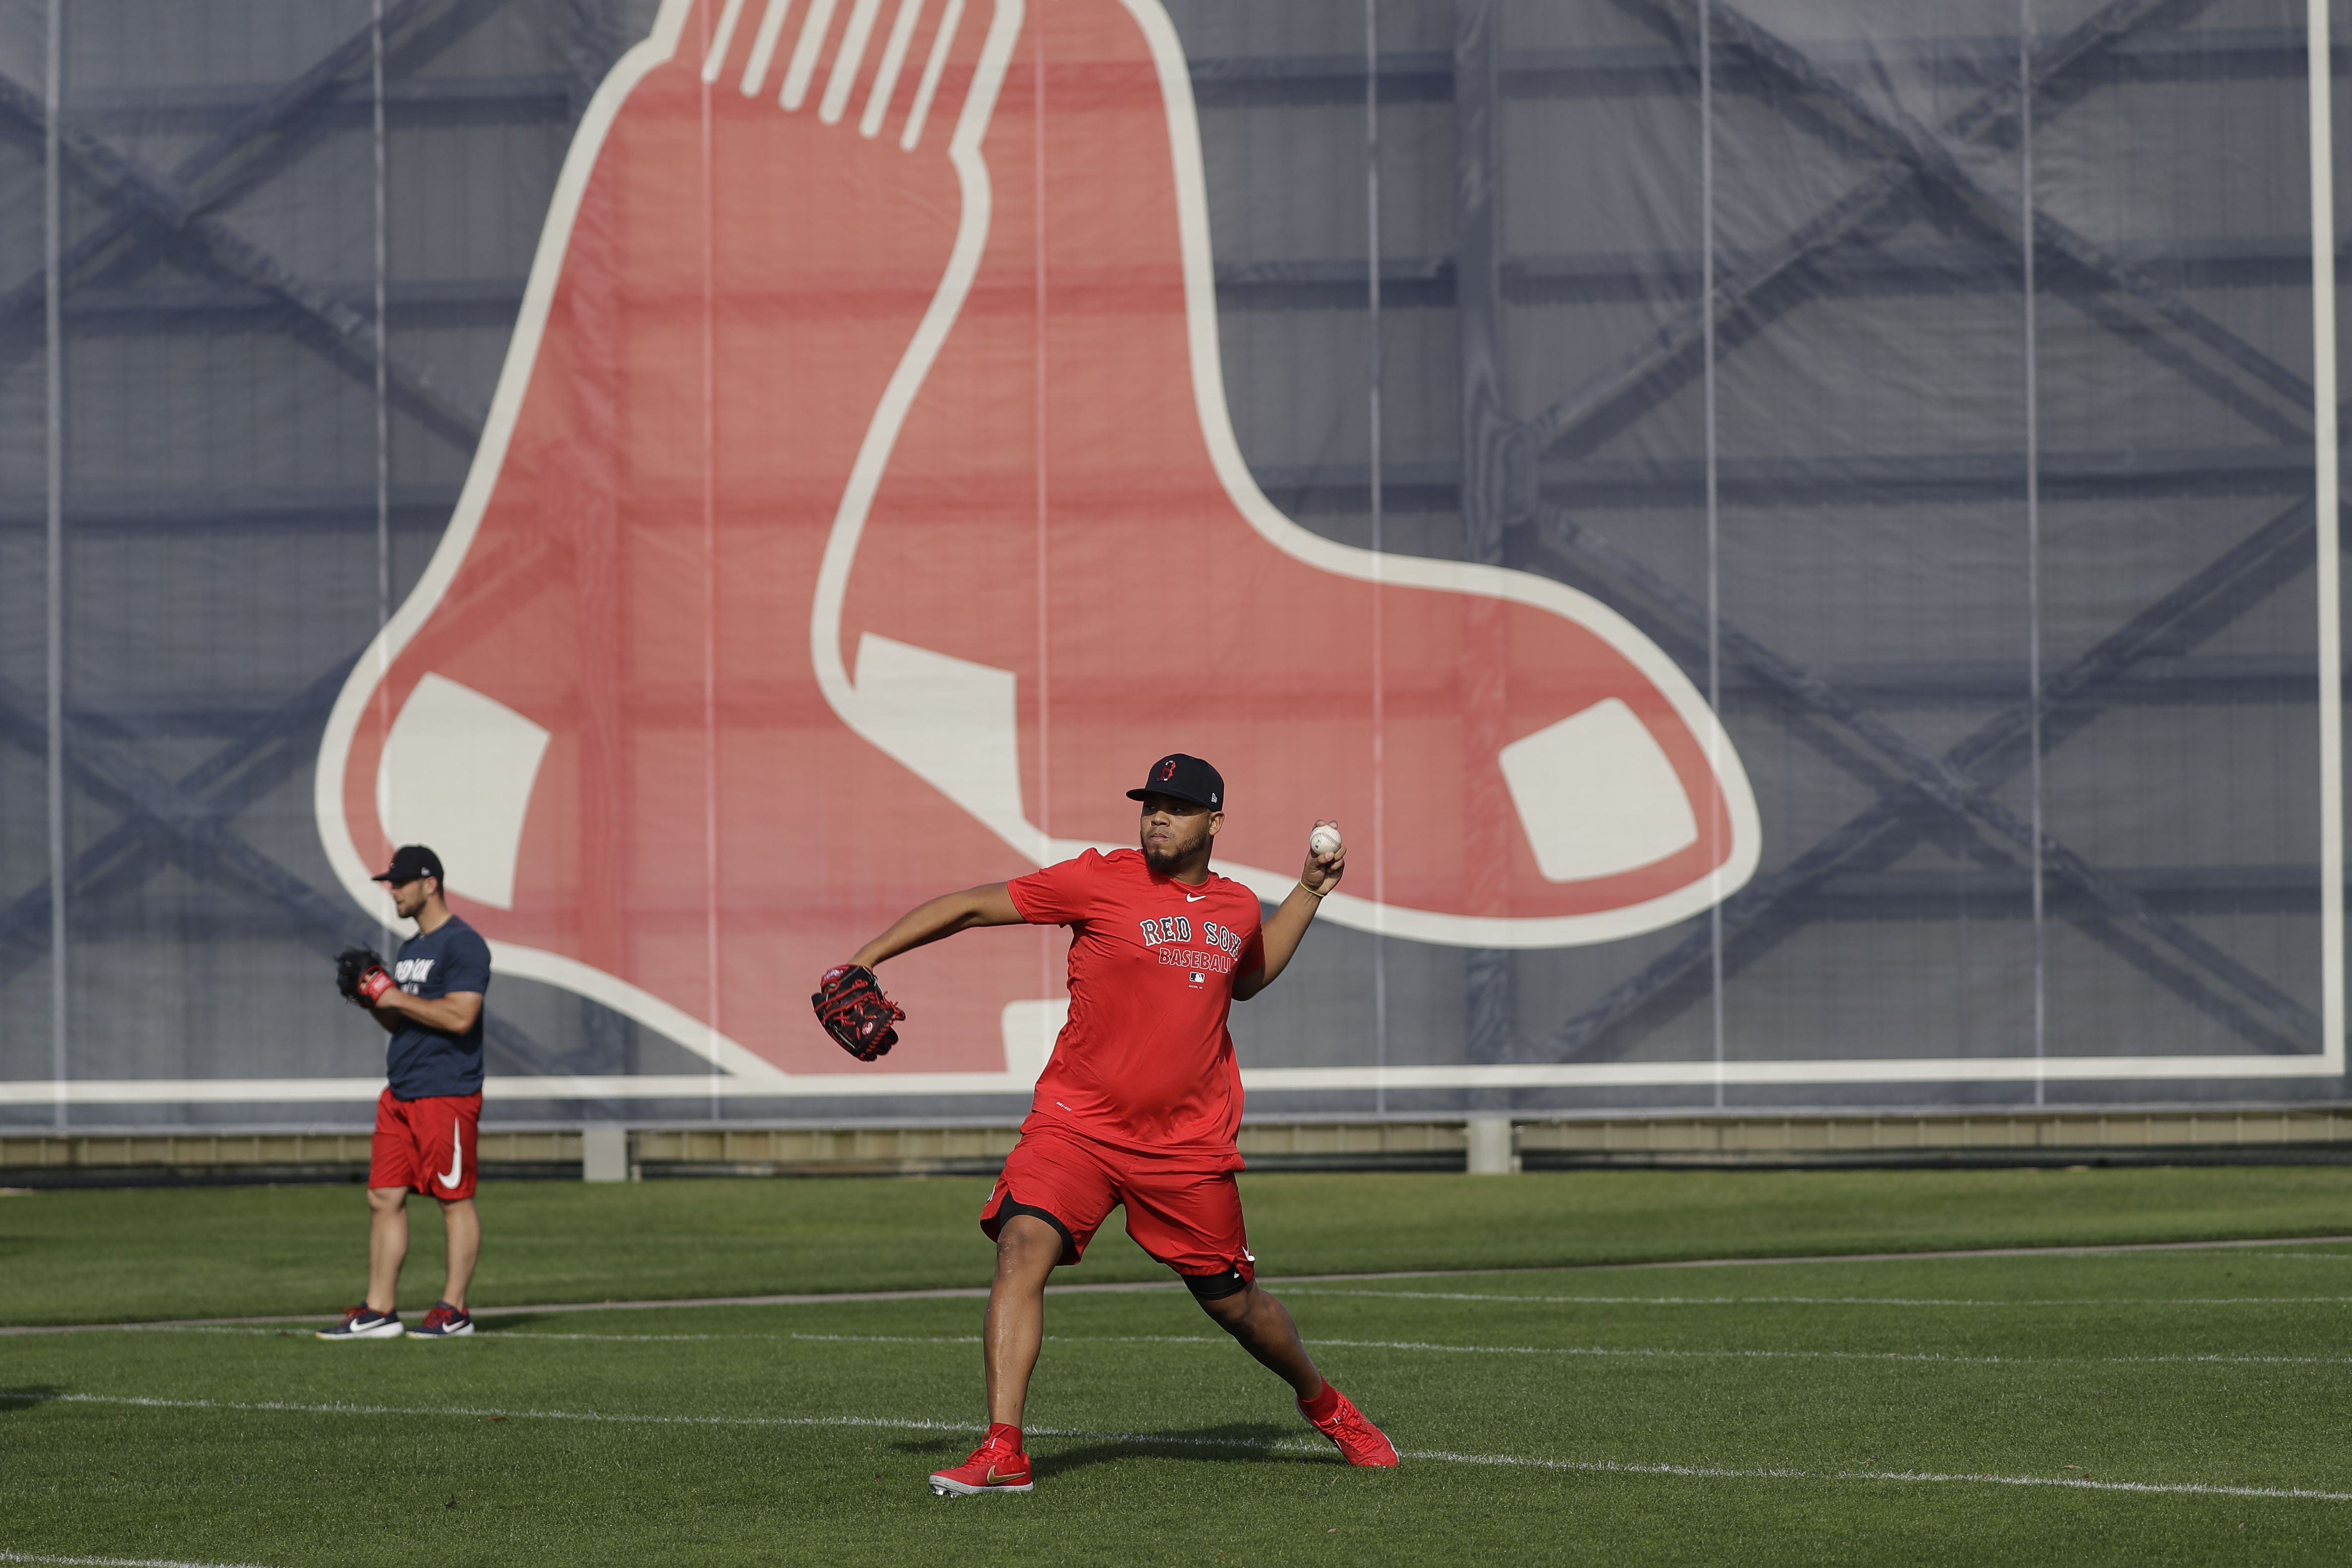 Photos: Red Sox spring training begins as pitchers and catchers arrive